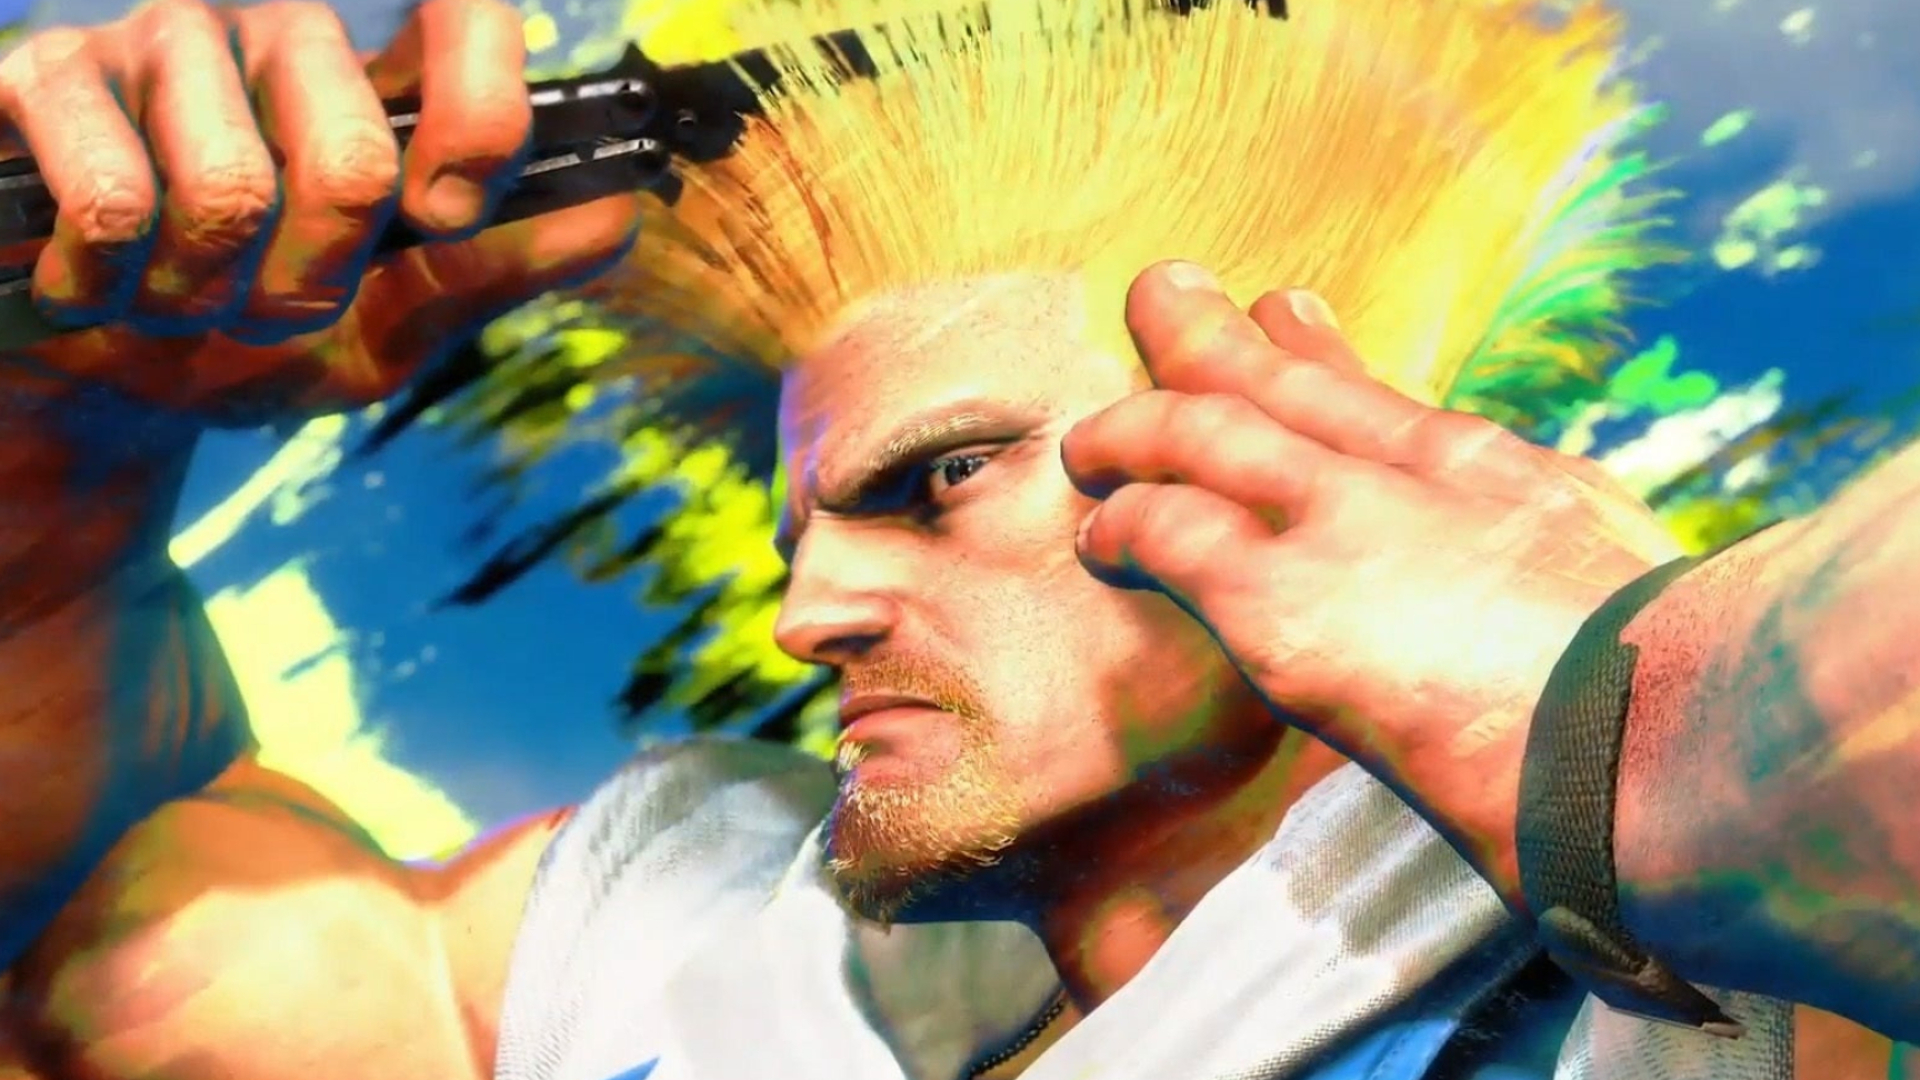 Guile, Street Fighter 6 debut, Gaming news, Exciting character reveal, 1920x1080 Full HD Desktop